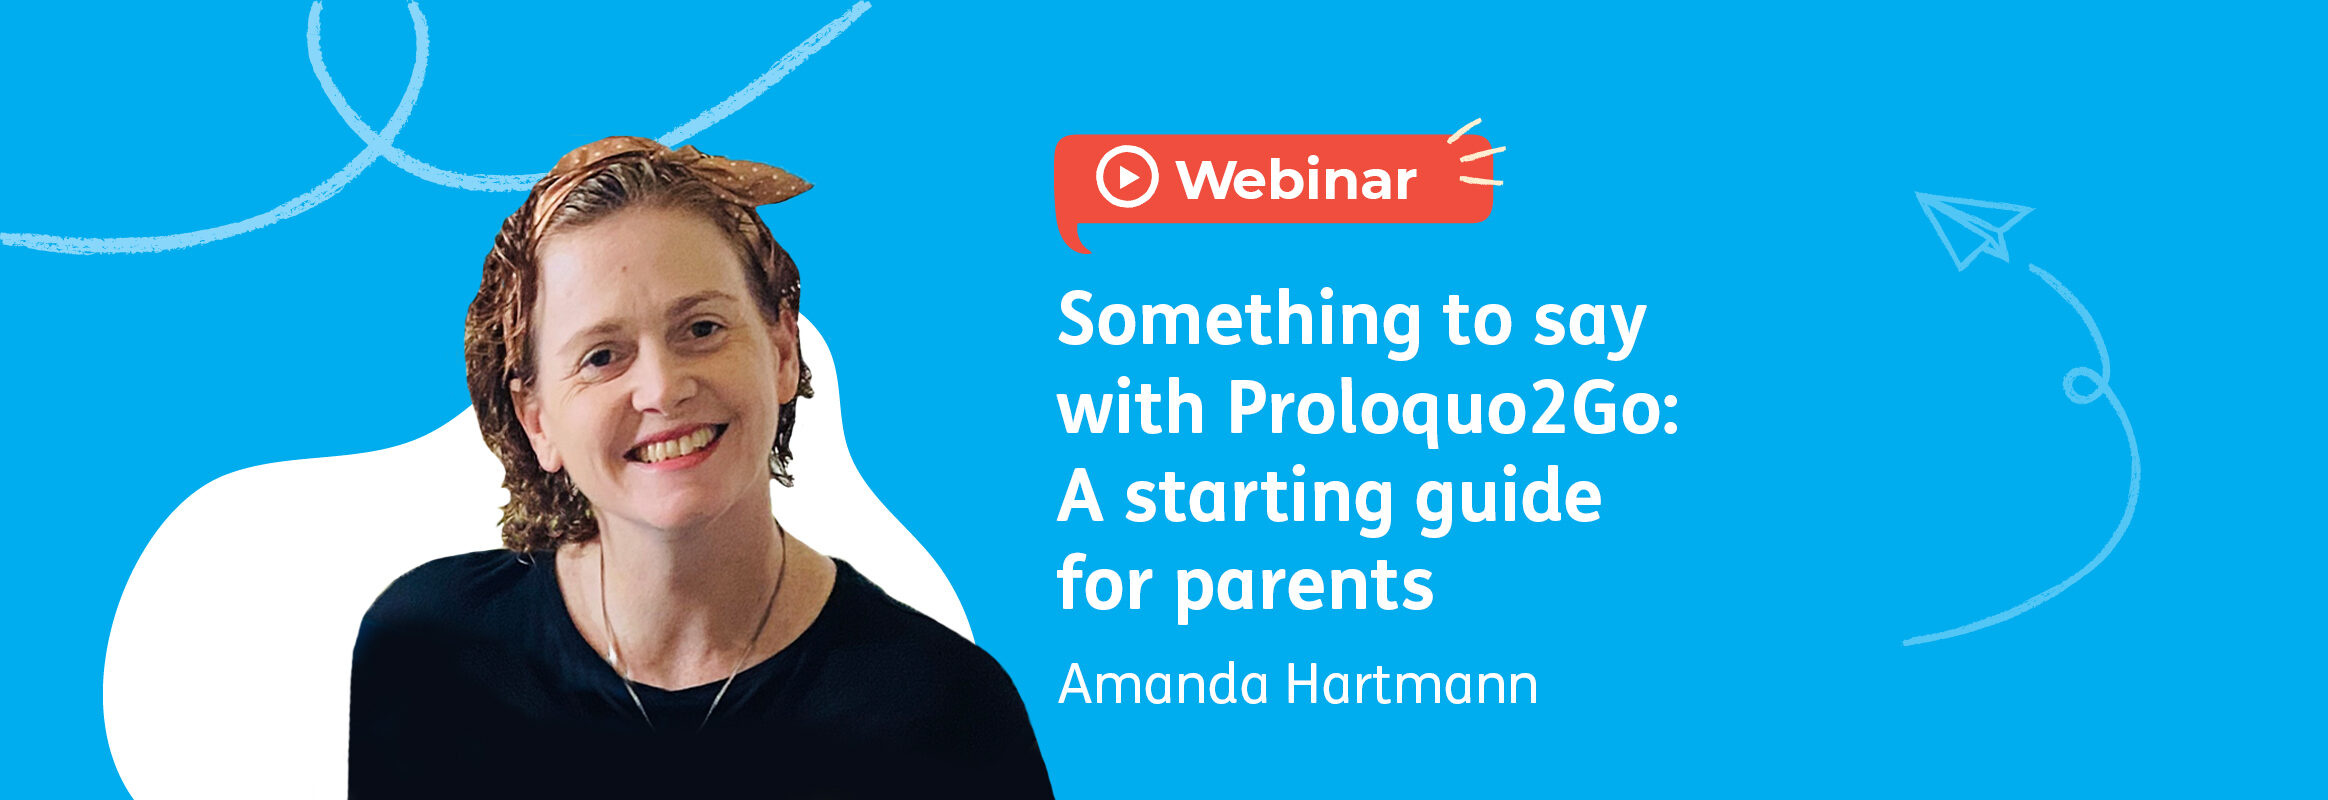 Webinar: Something to say with Proloquo2Go – A starting guide for parents